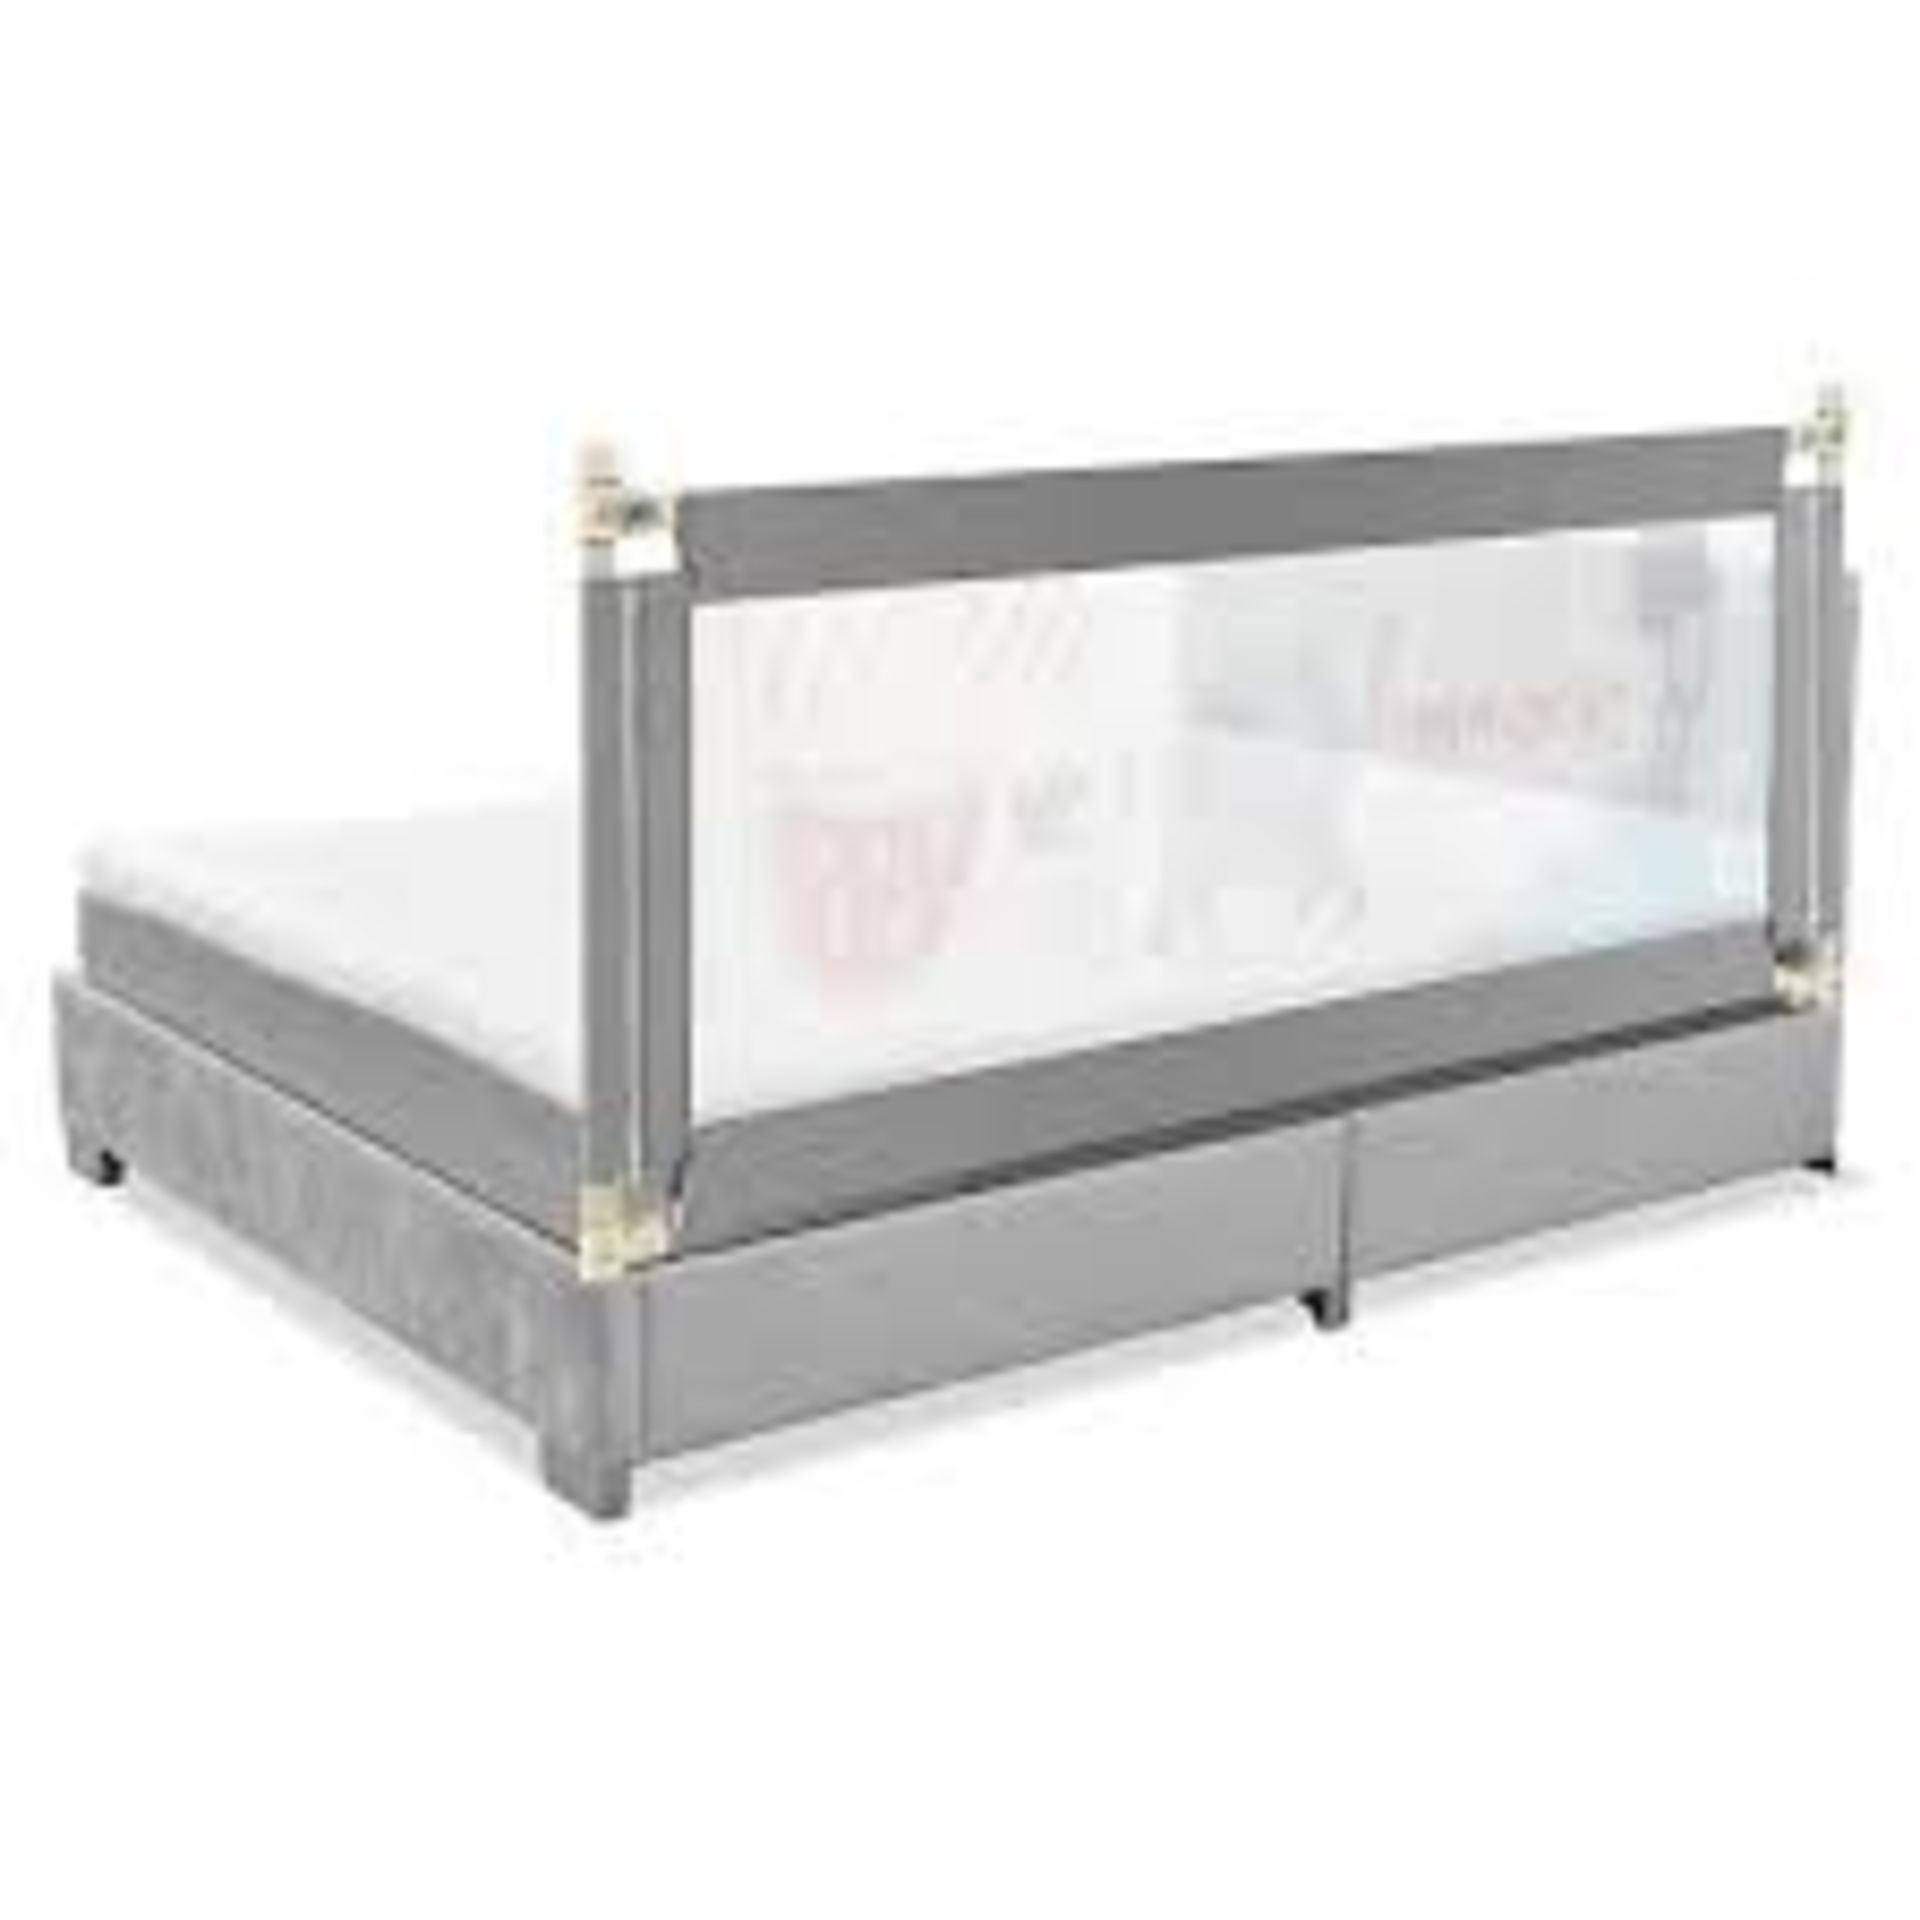 Single Toddler Bed Guard Height Adjustable Baby Bed Rail . - R14.14.